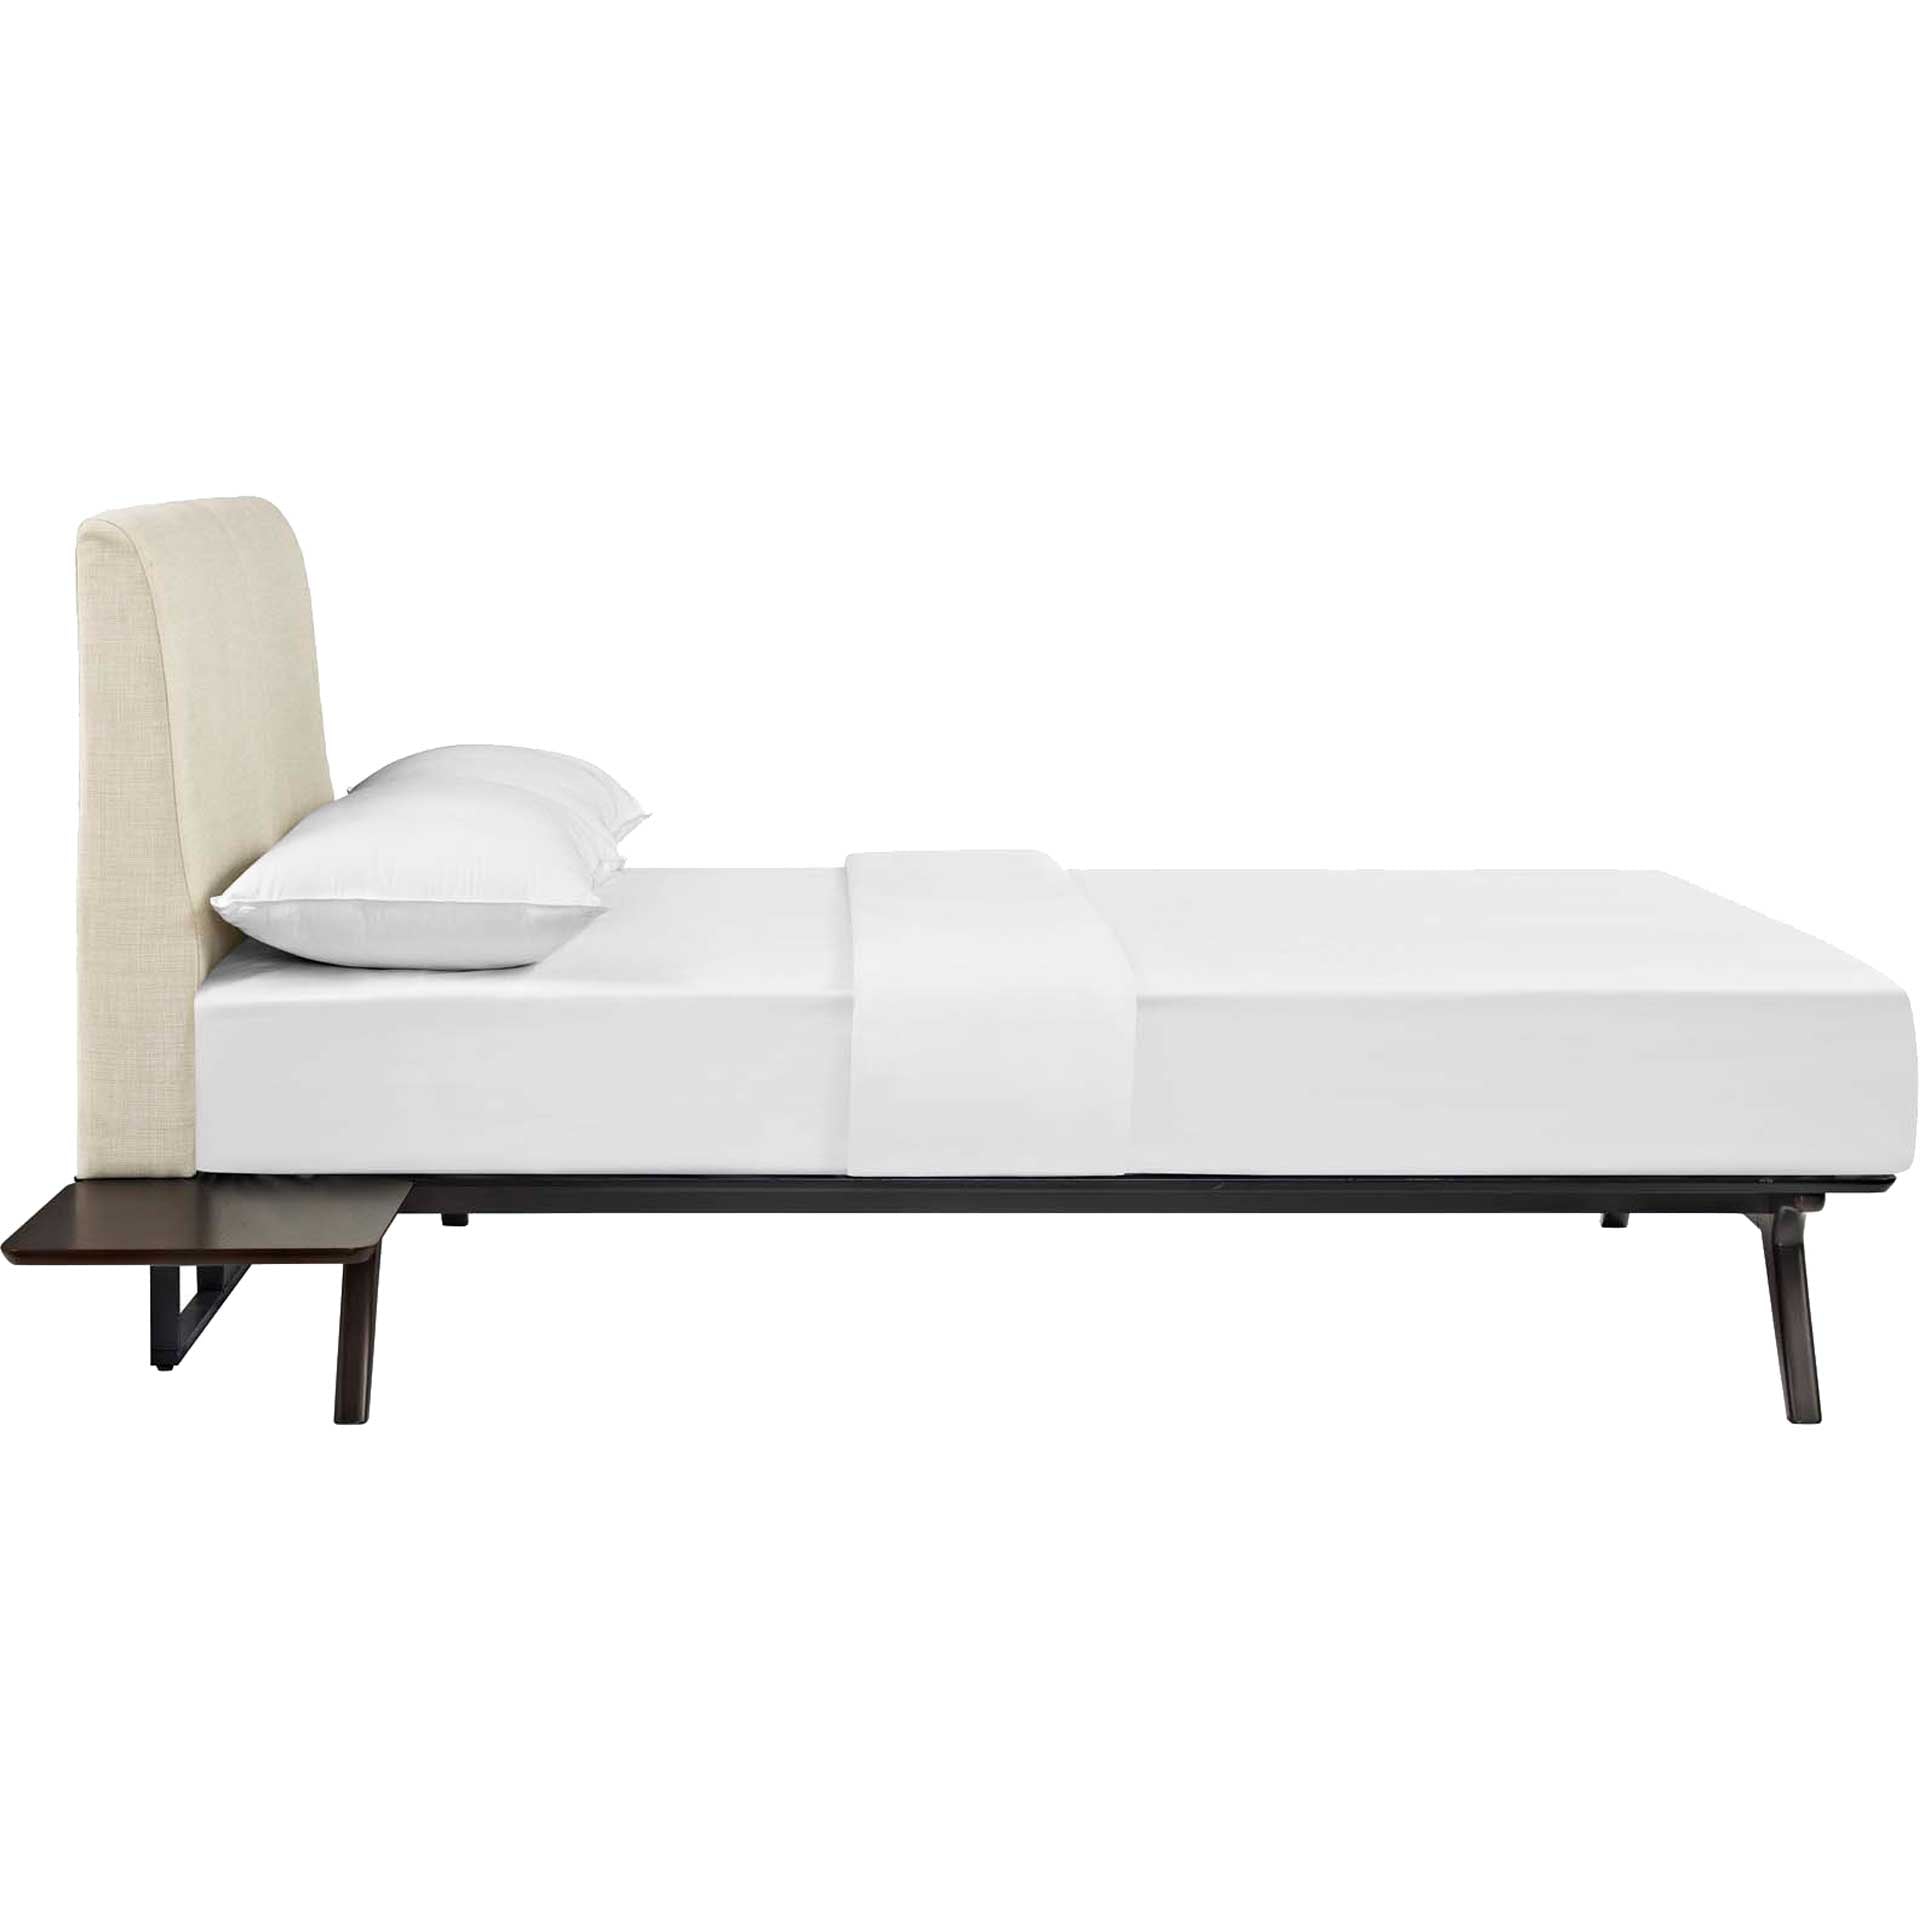 Thames Bed Cappuccino/Beige With Side Tables